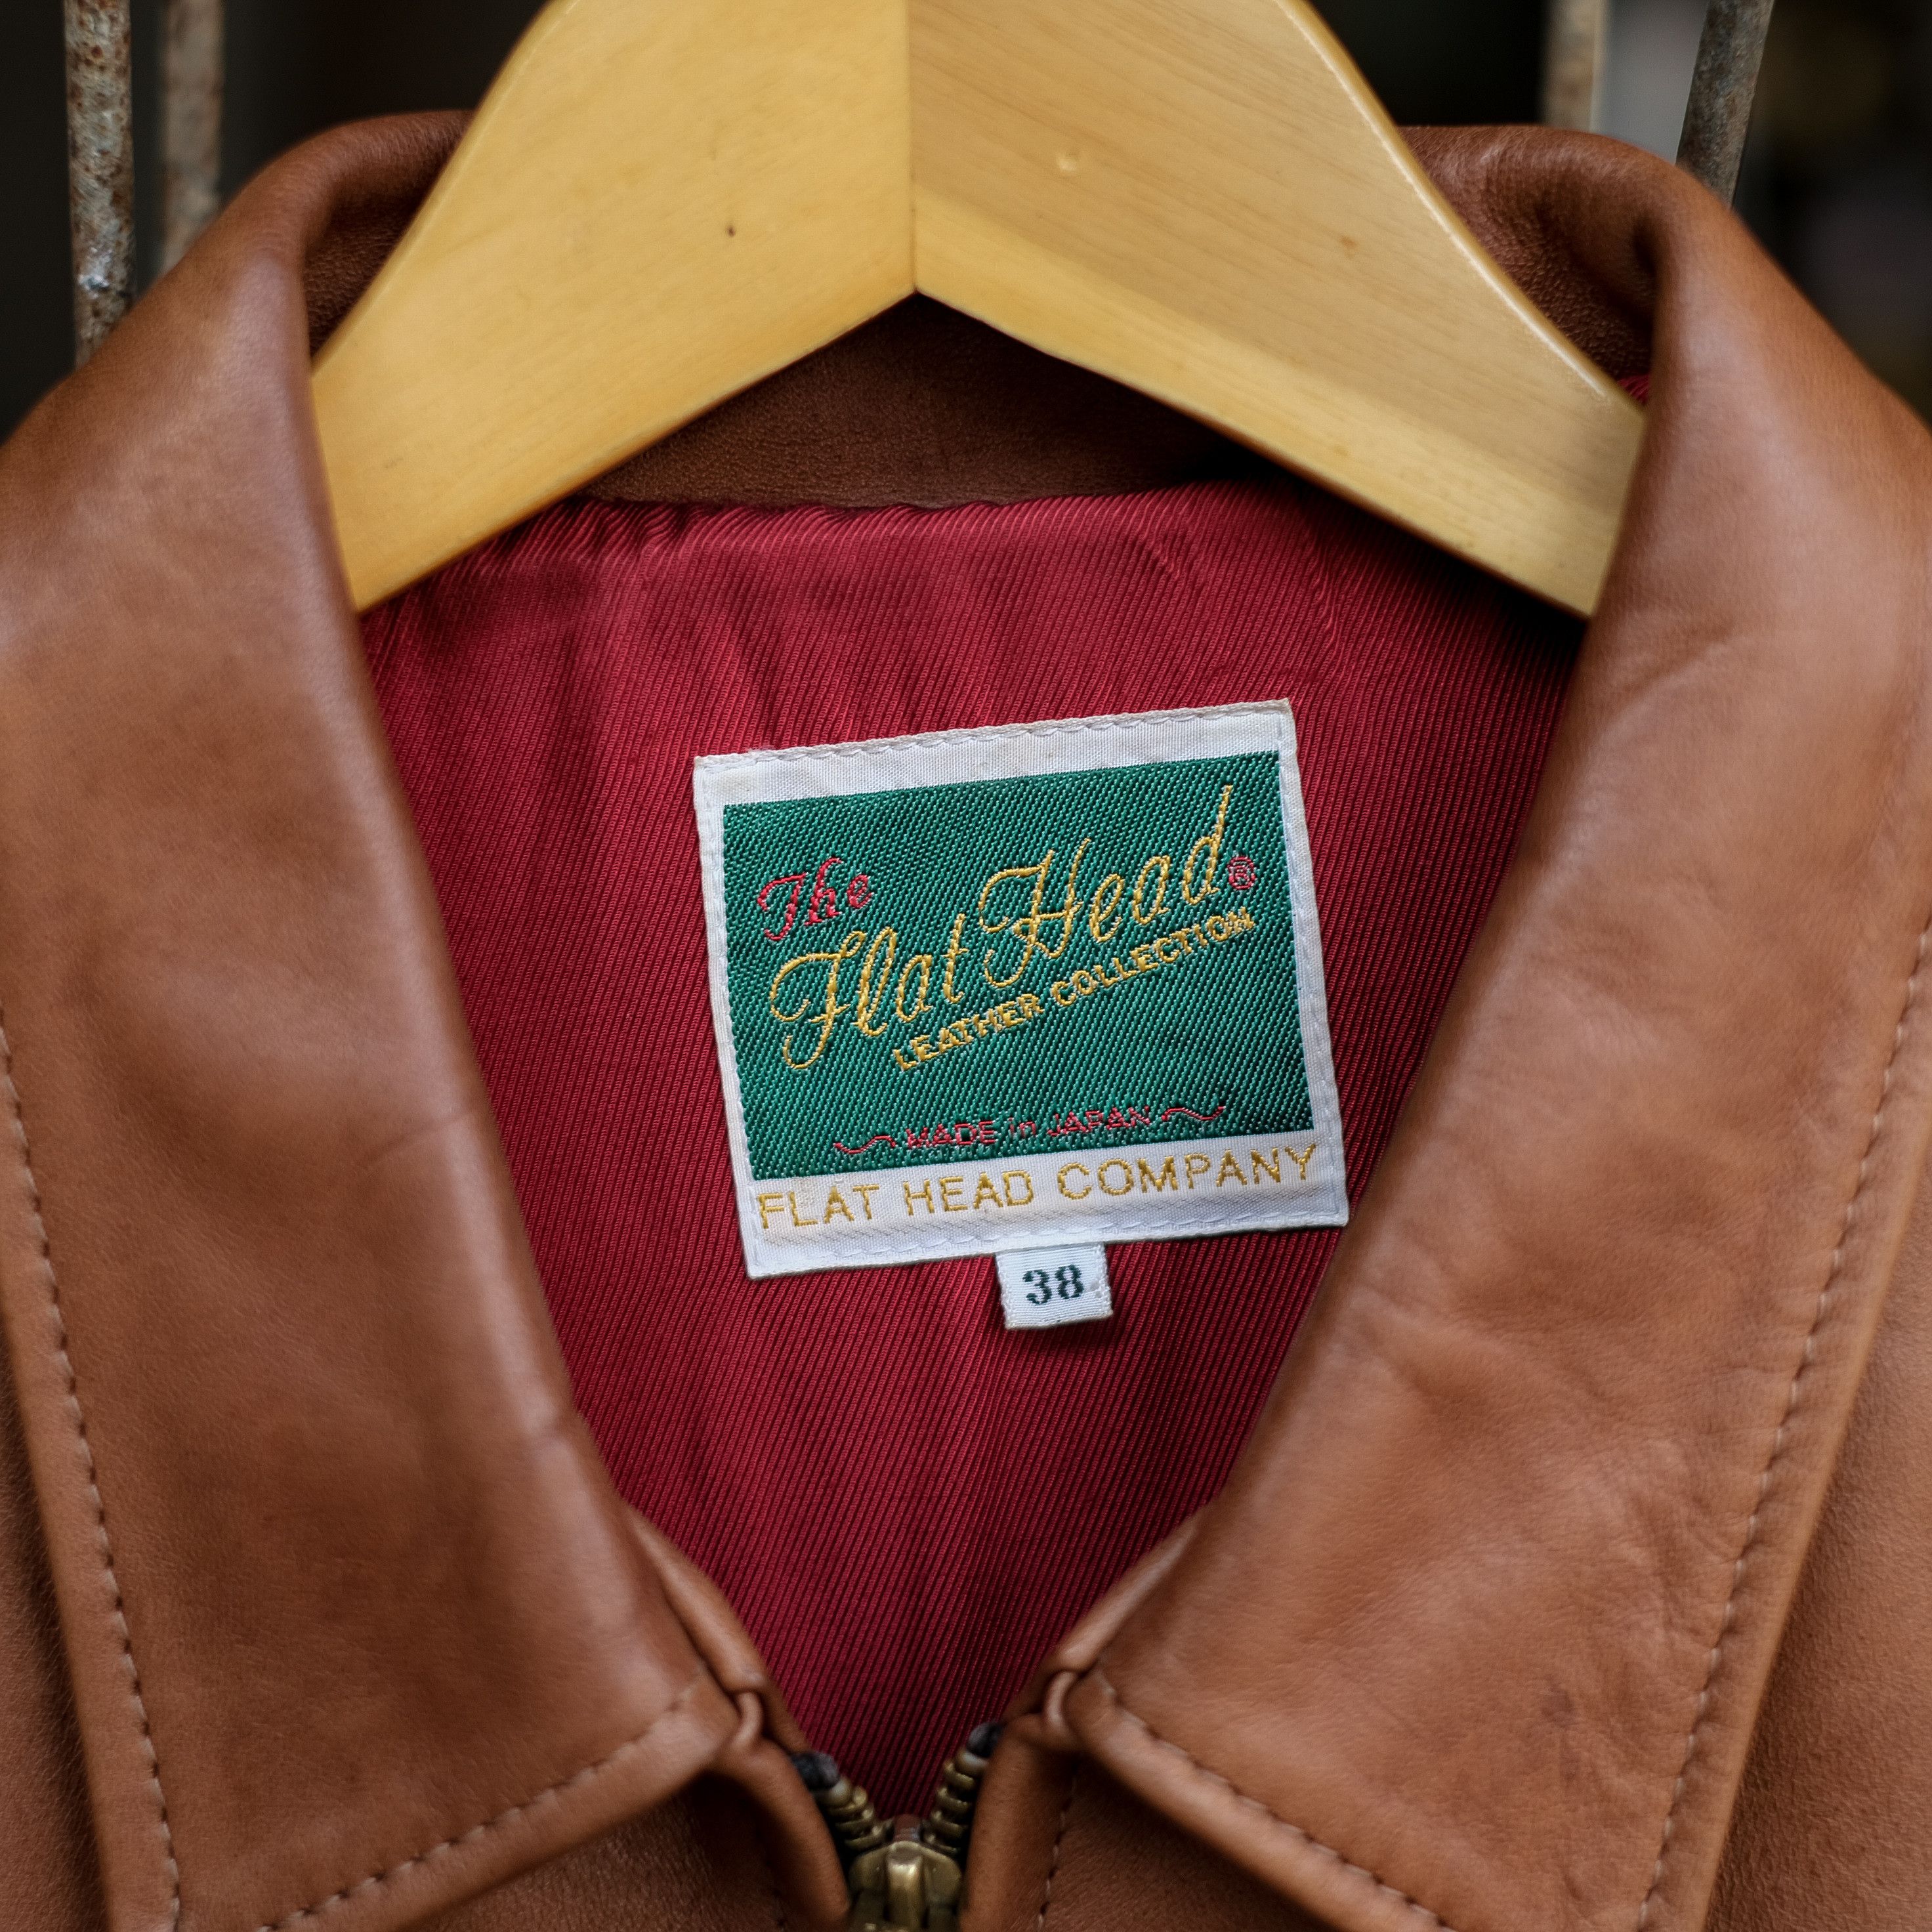 The Flat Head The Flat Head Leather Horsehide RiderJacket Size US S / EU 44-46 / 1 - 2 Preview